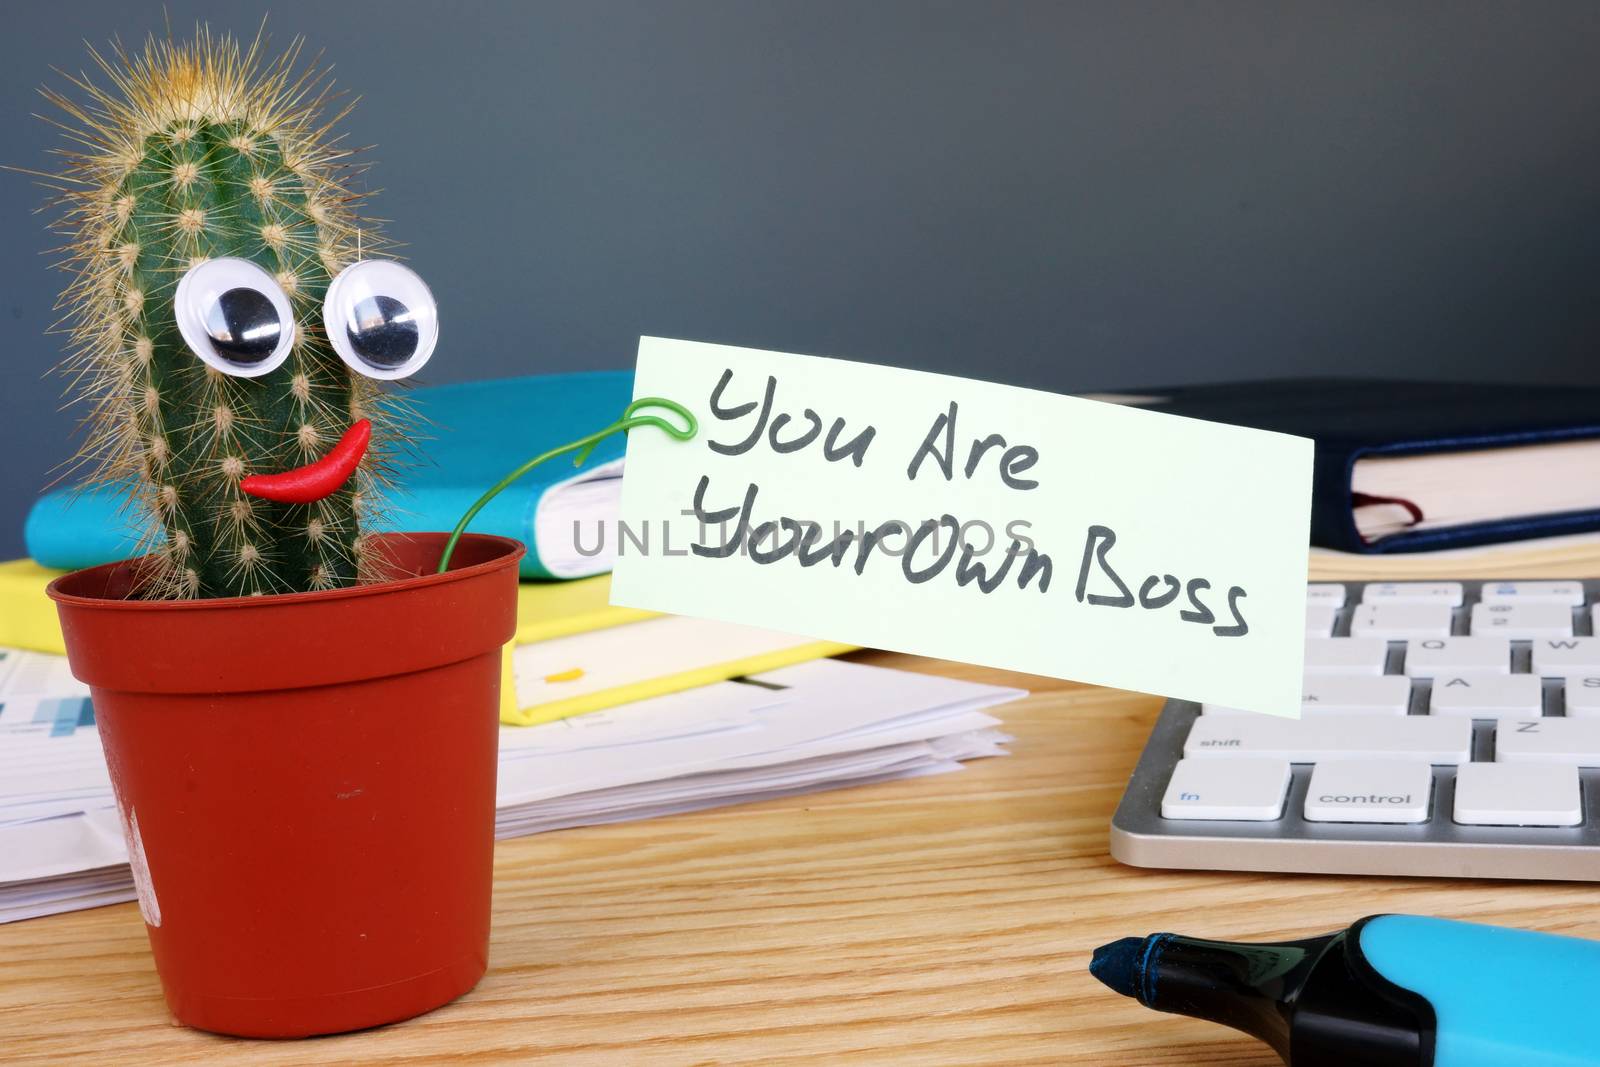 You are your own boss sign on the desk. by designer491